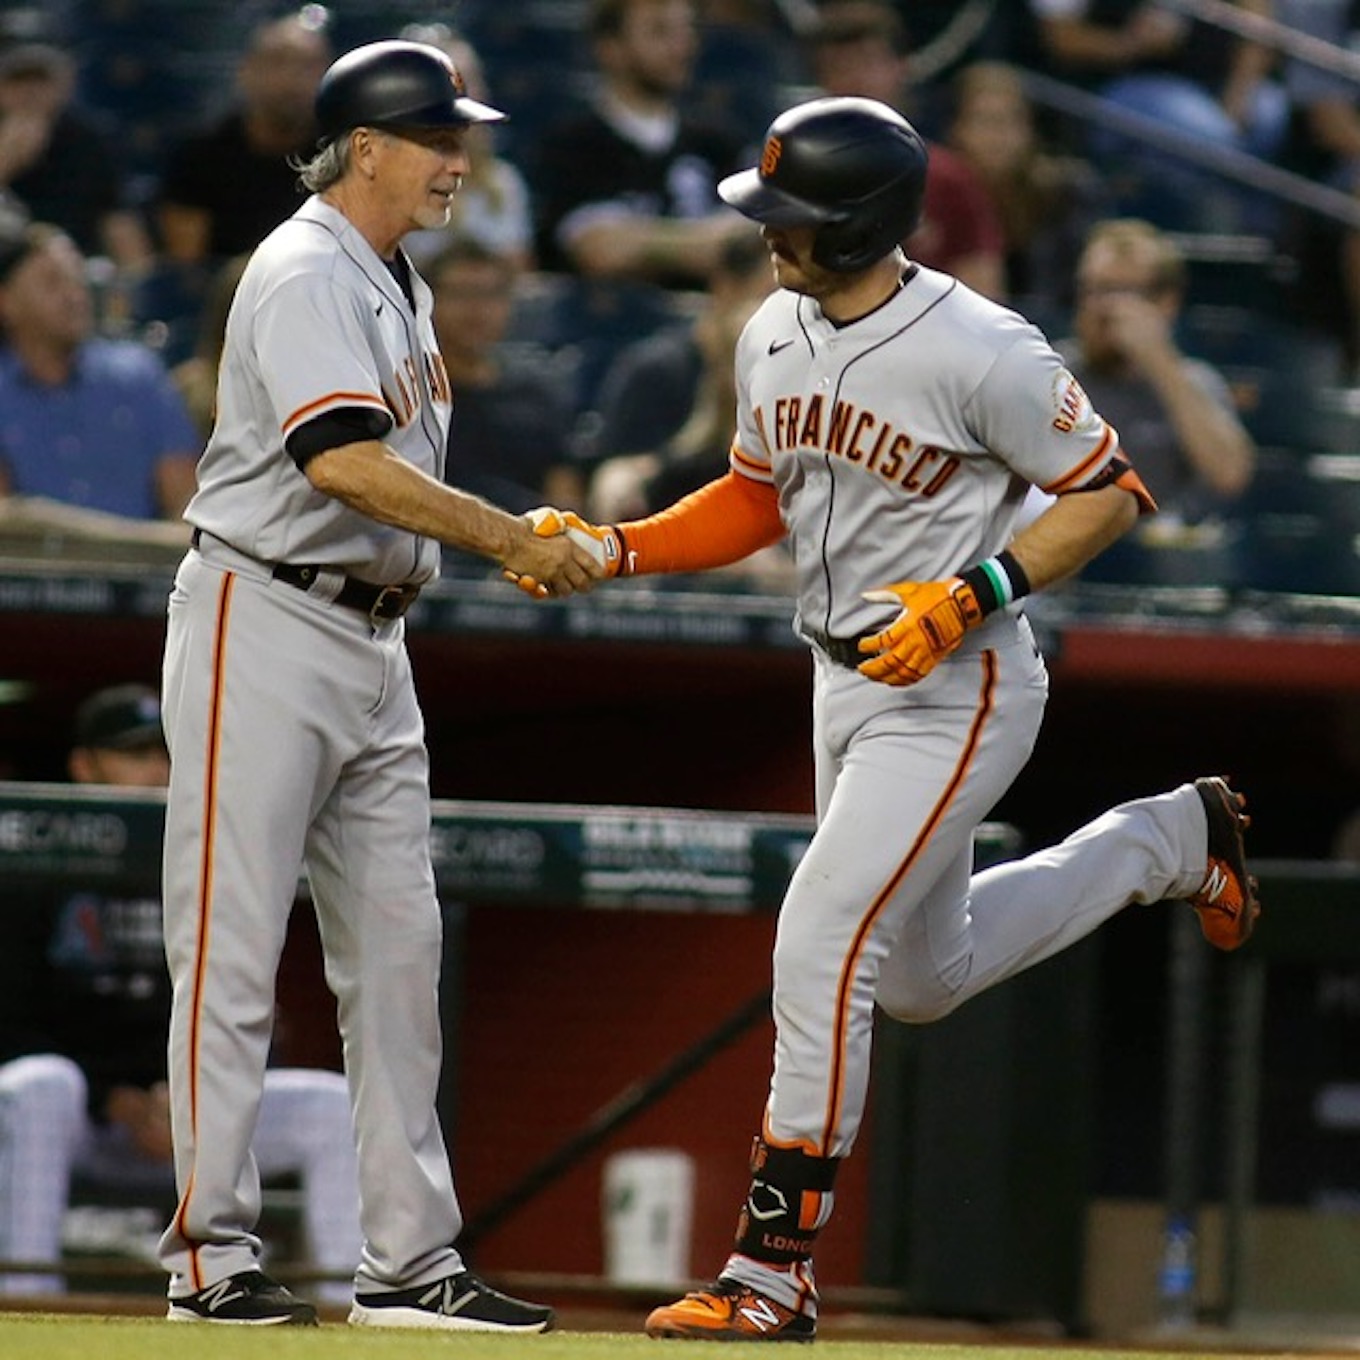 Giants end skid, cruise past D-backs